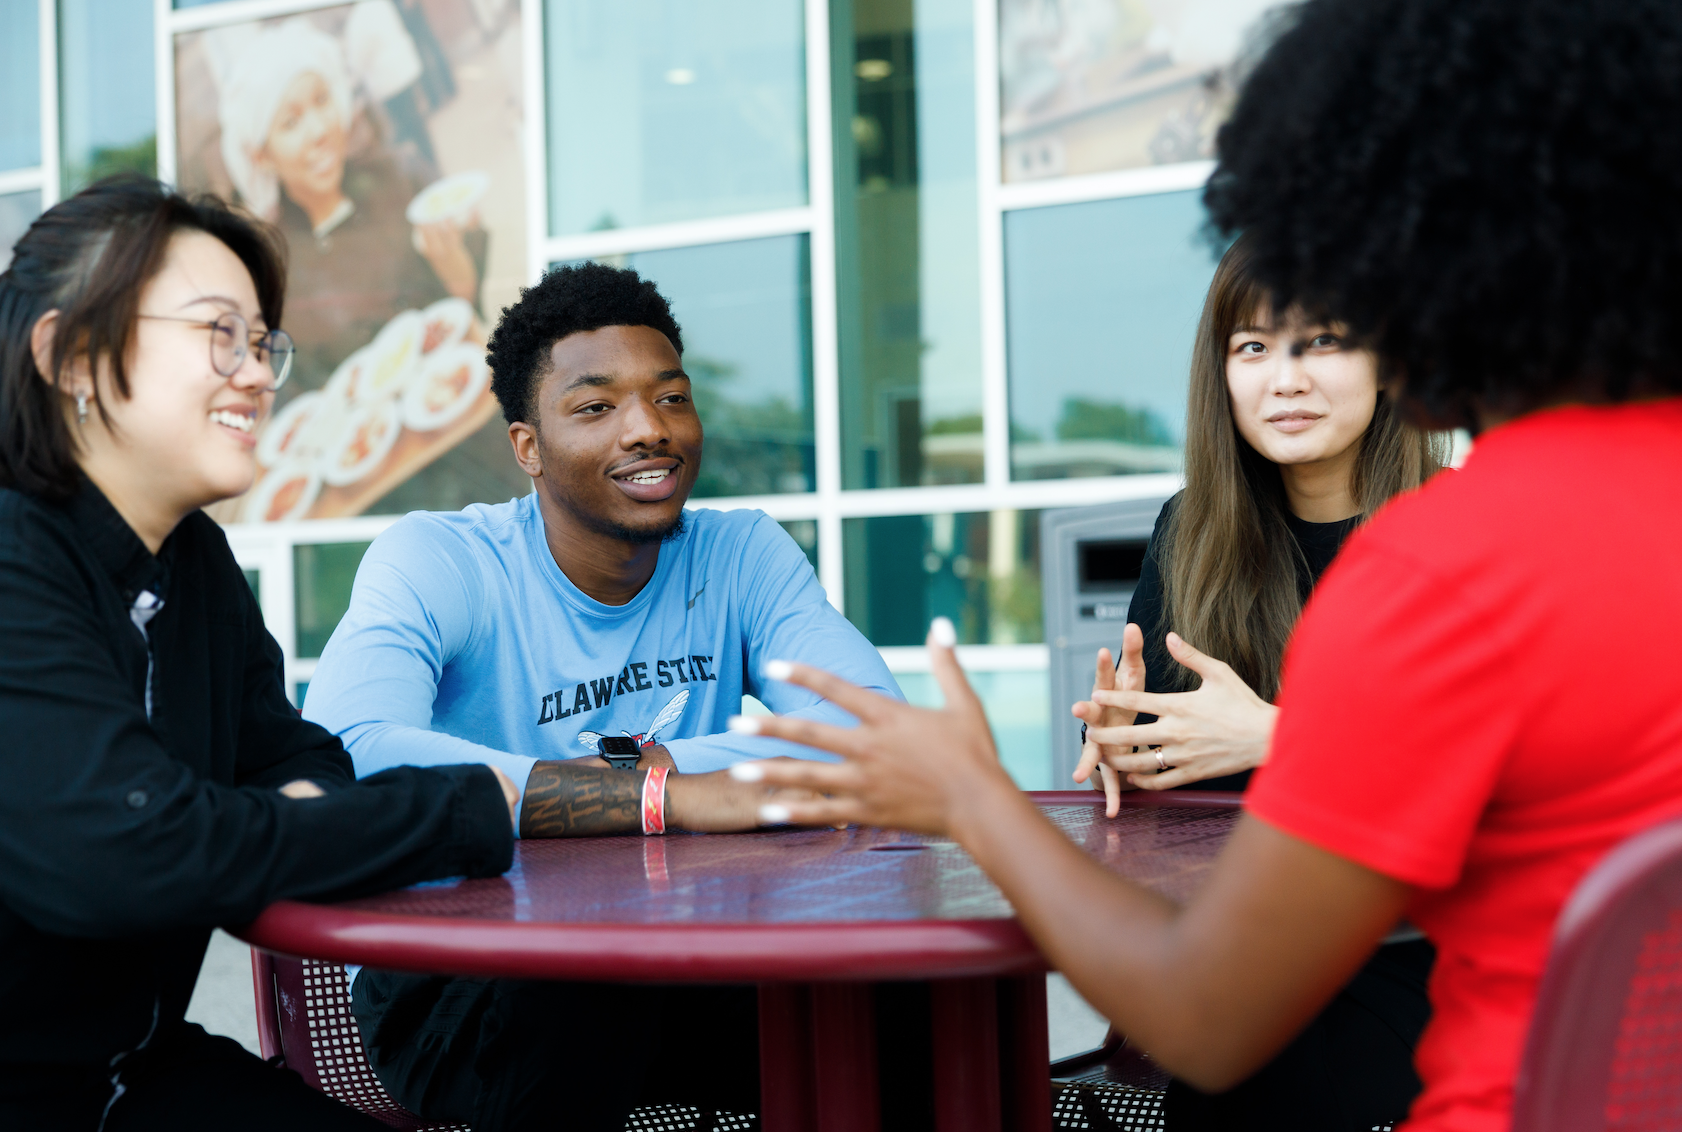 The latest round of debt reductions will enable Delaware State University students with the highest debt to focus less on that and concentrate more on their academic journey.